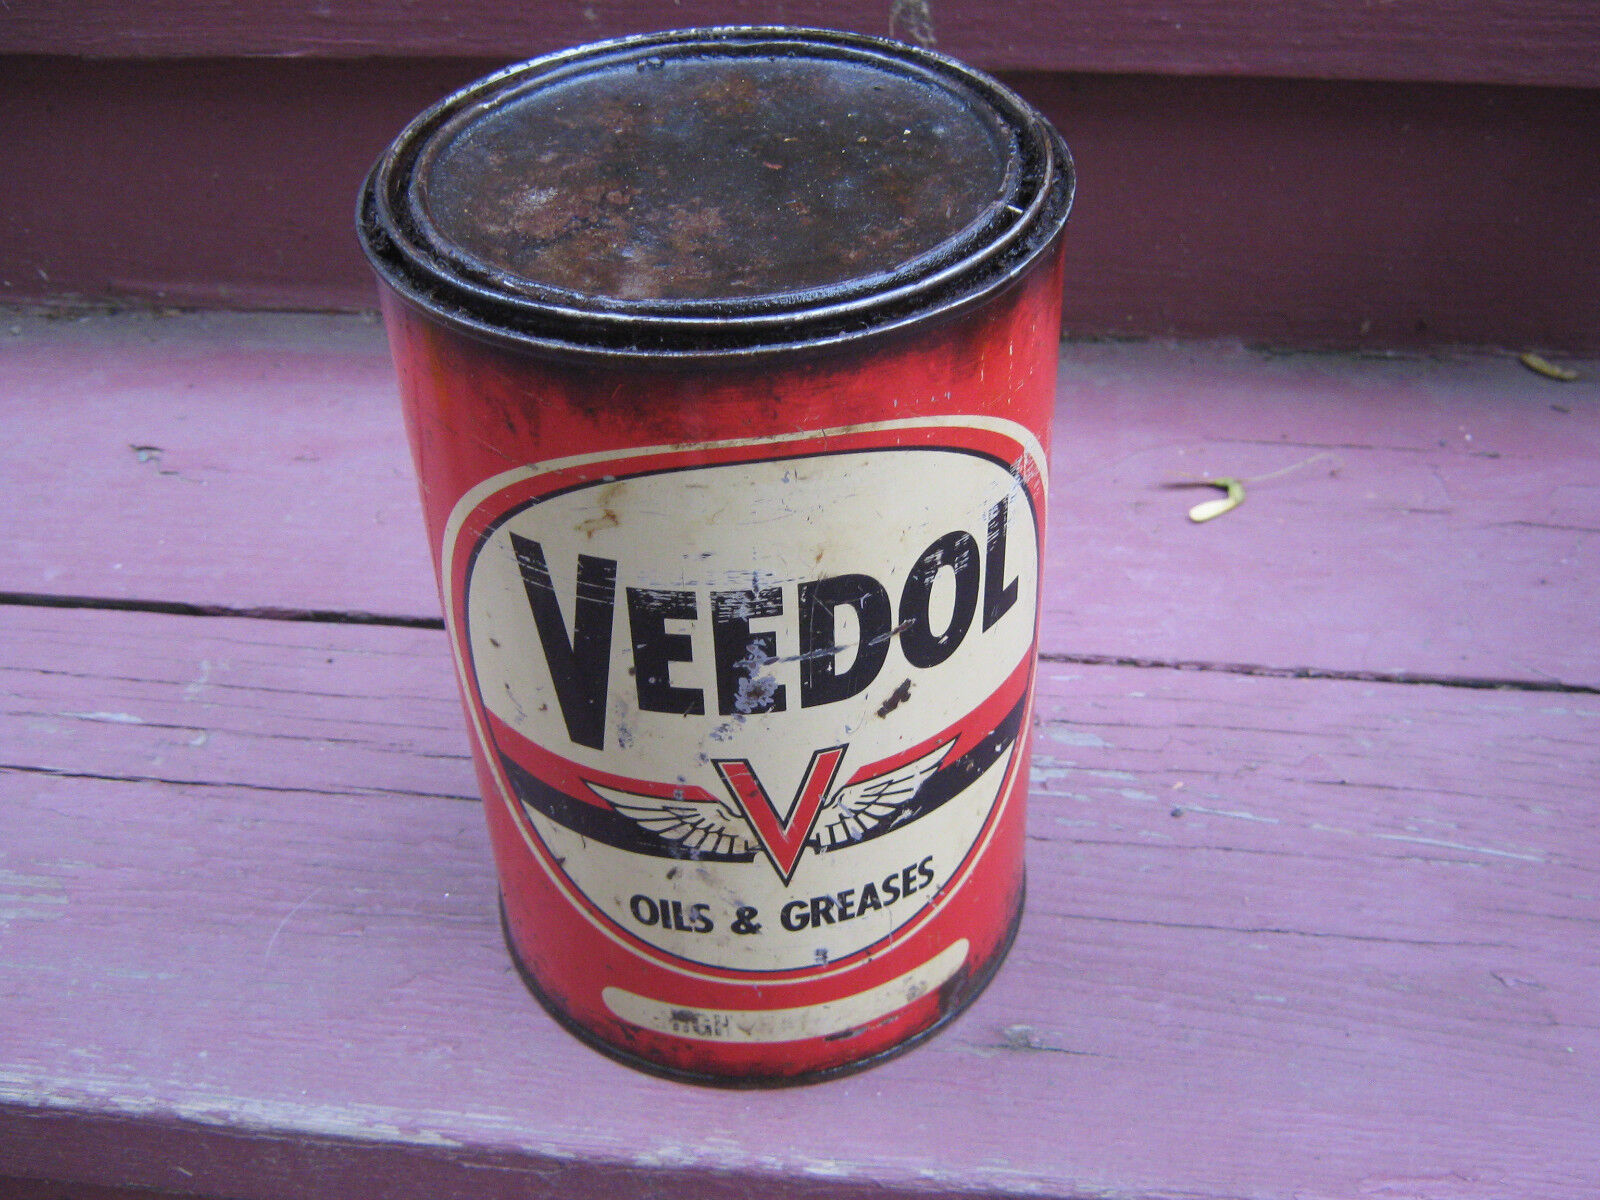 Veedol Oils & Greases 5 Pound Can